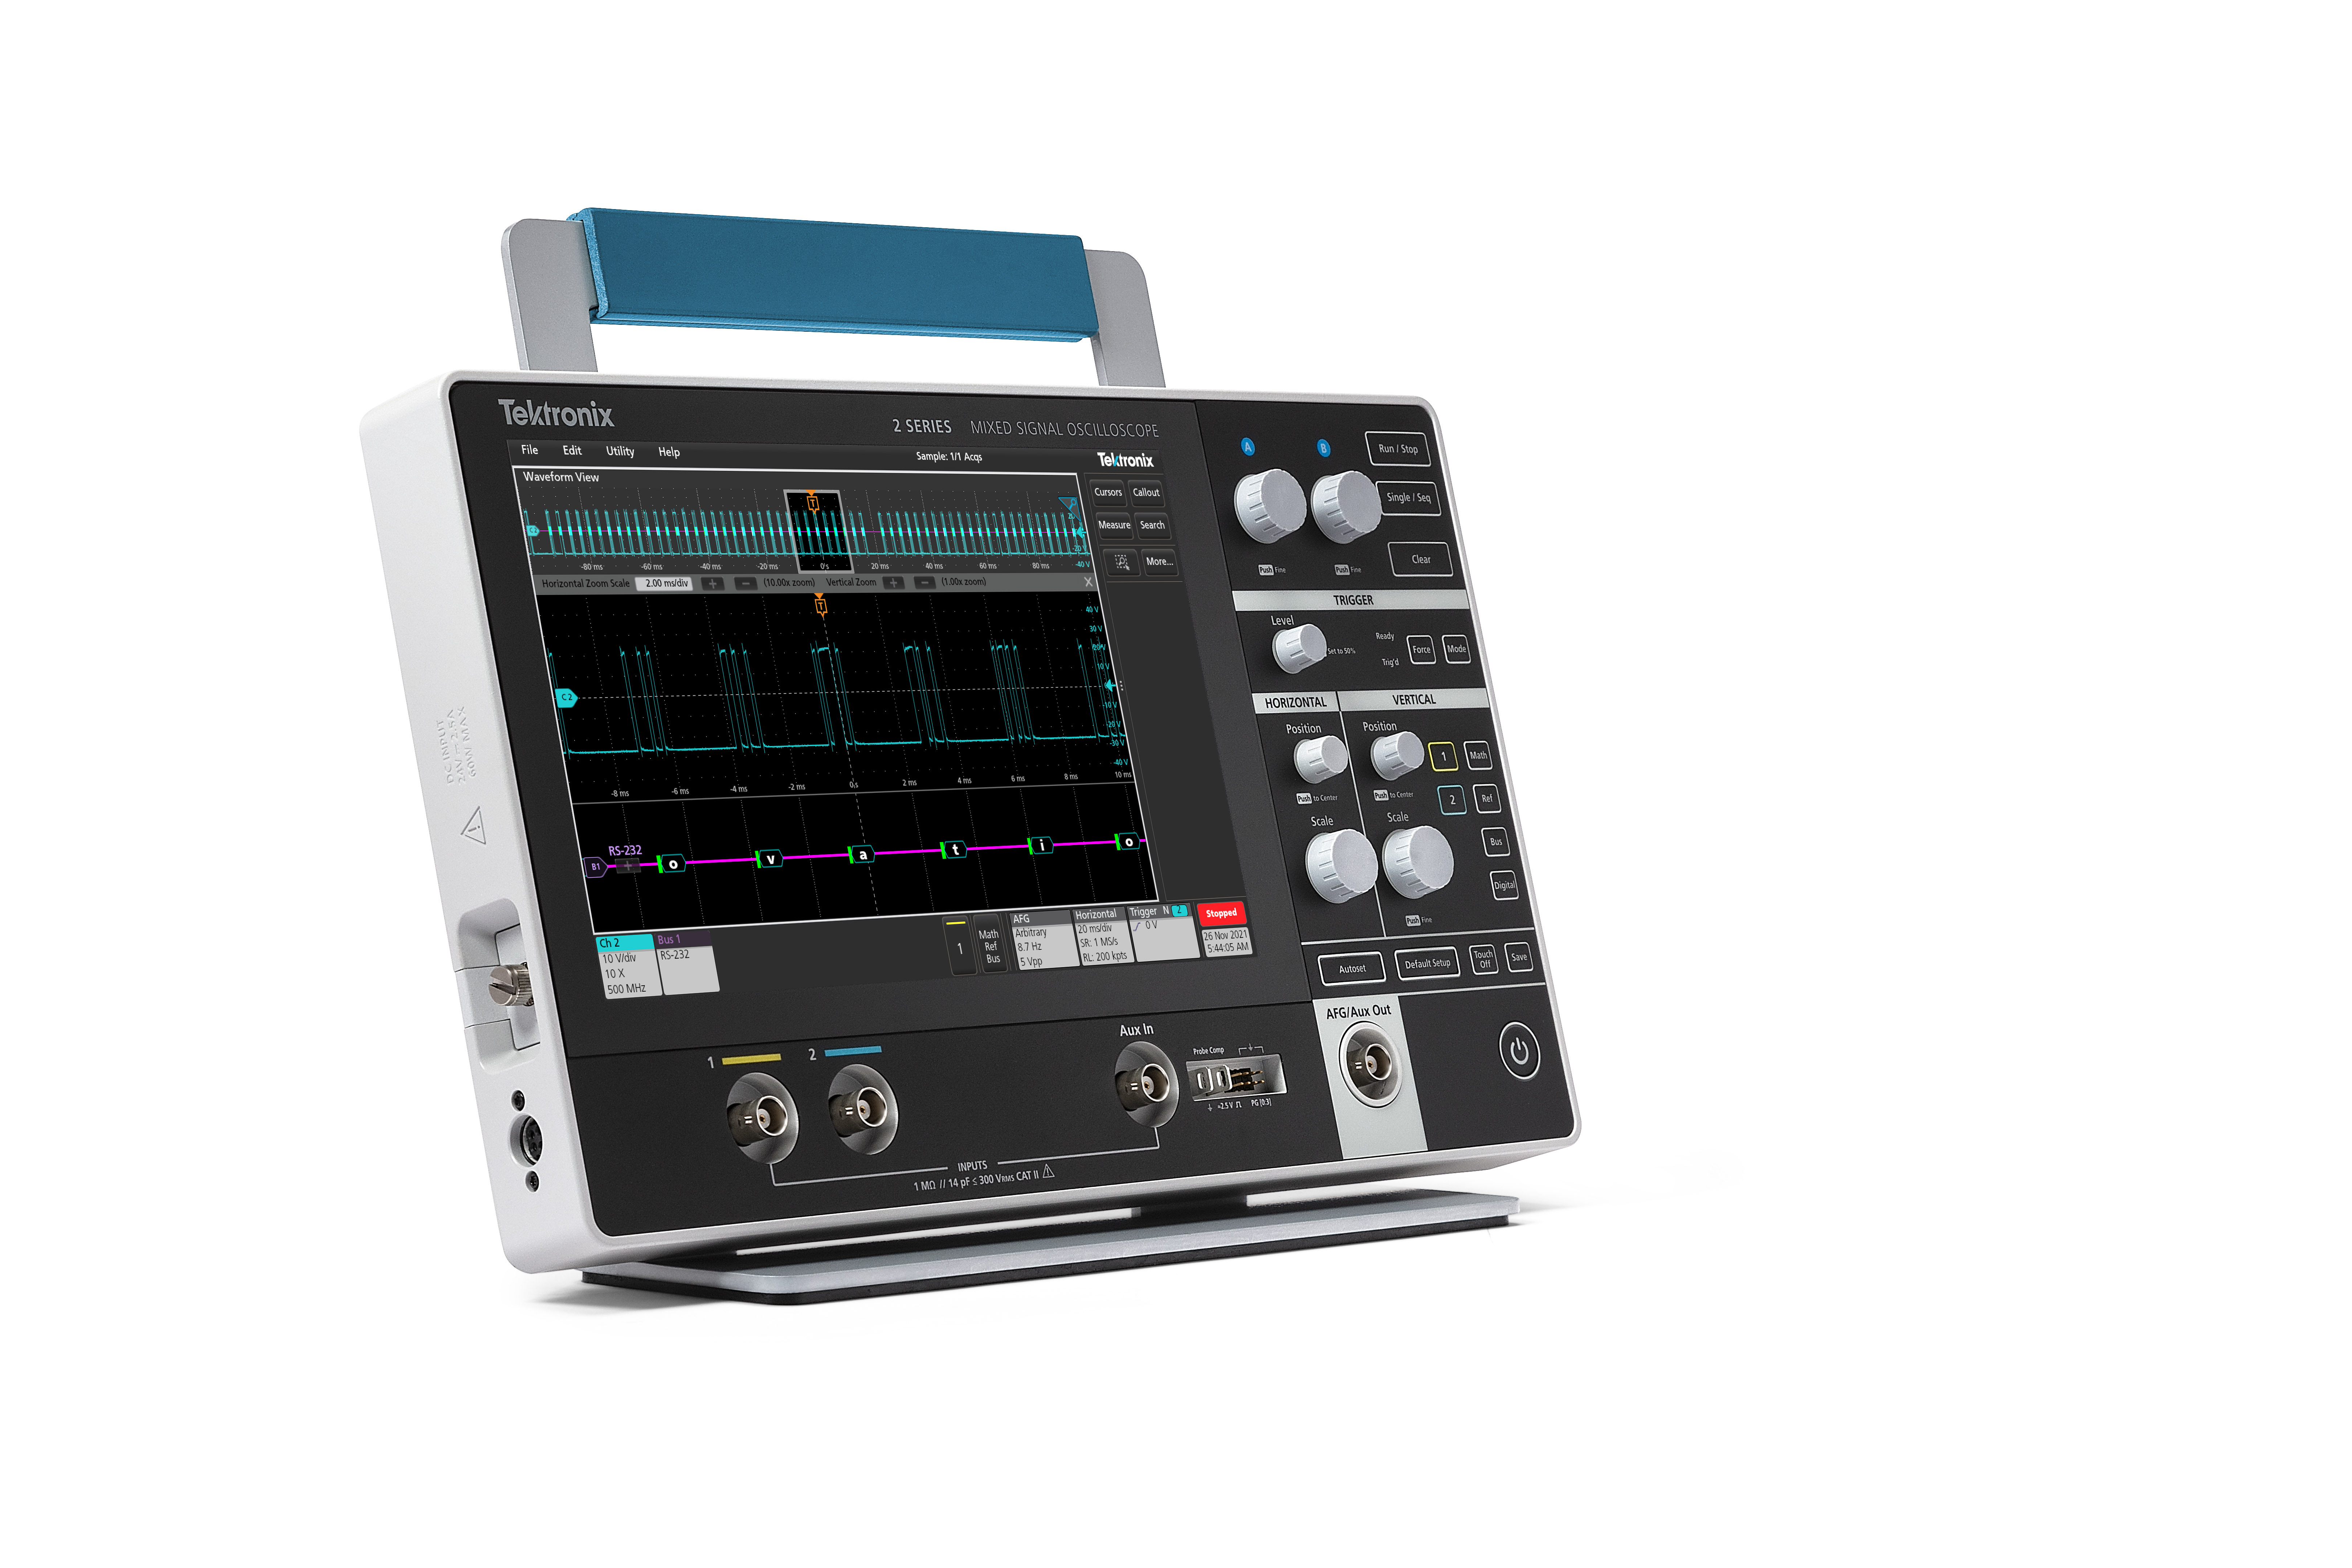 Tektronix 2 Series Mixed Signal Oscilloscope Available from TestEquity